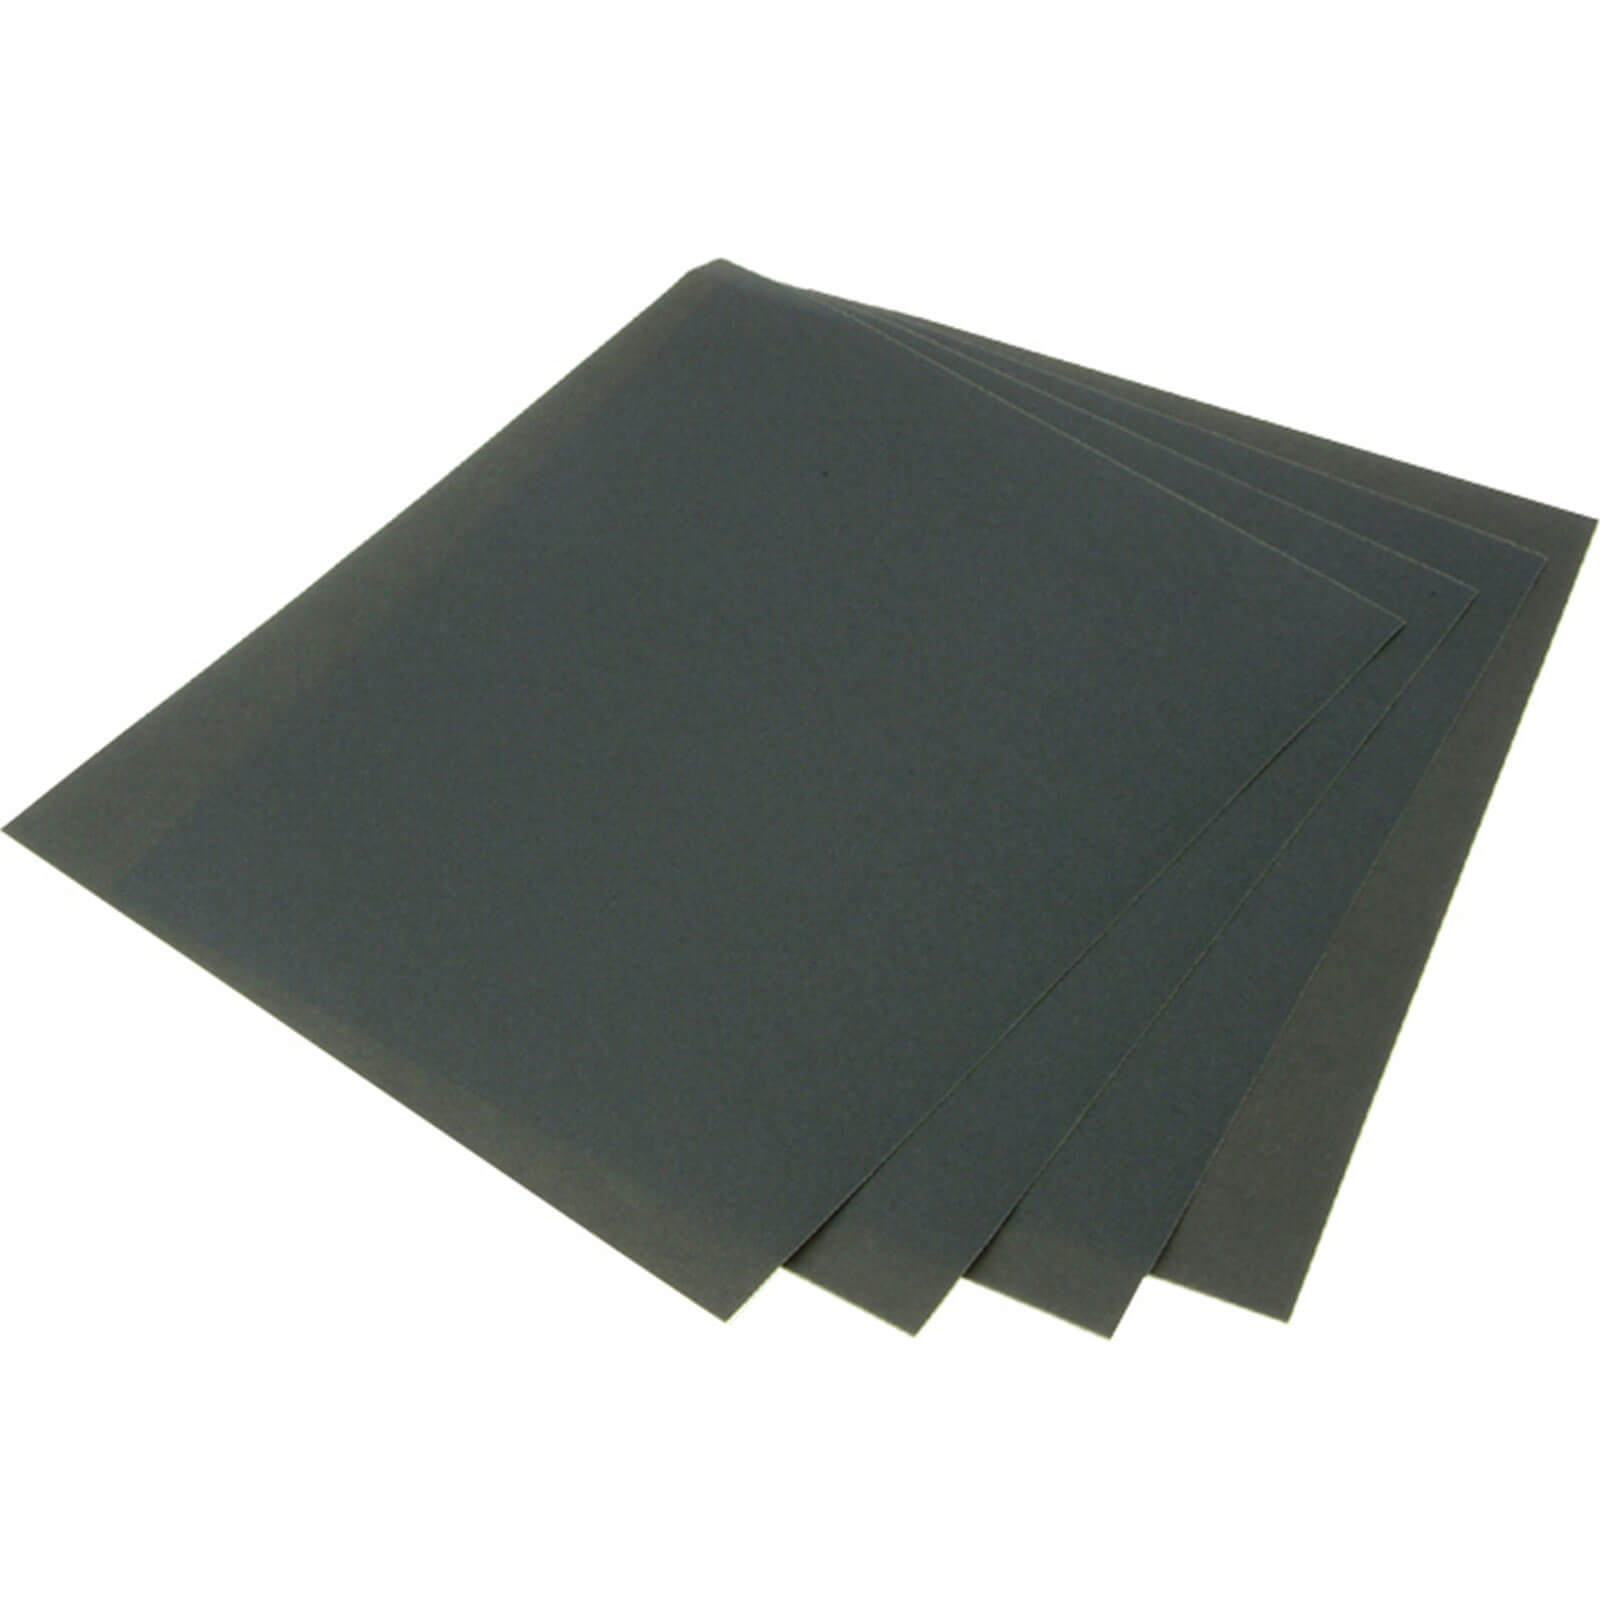 Image of Faithfull Wet and Dry Paper Sheets 230 x 280mm 240g Pack of 25